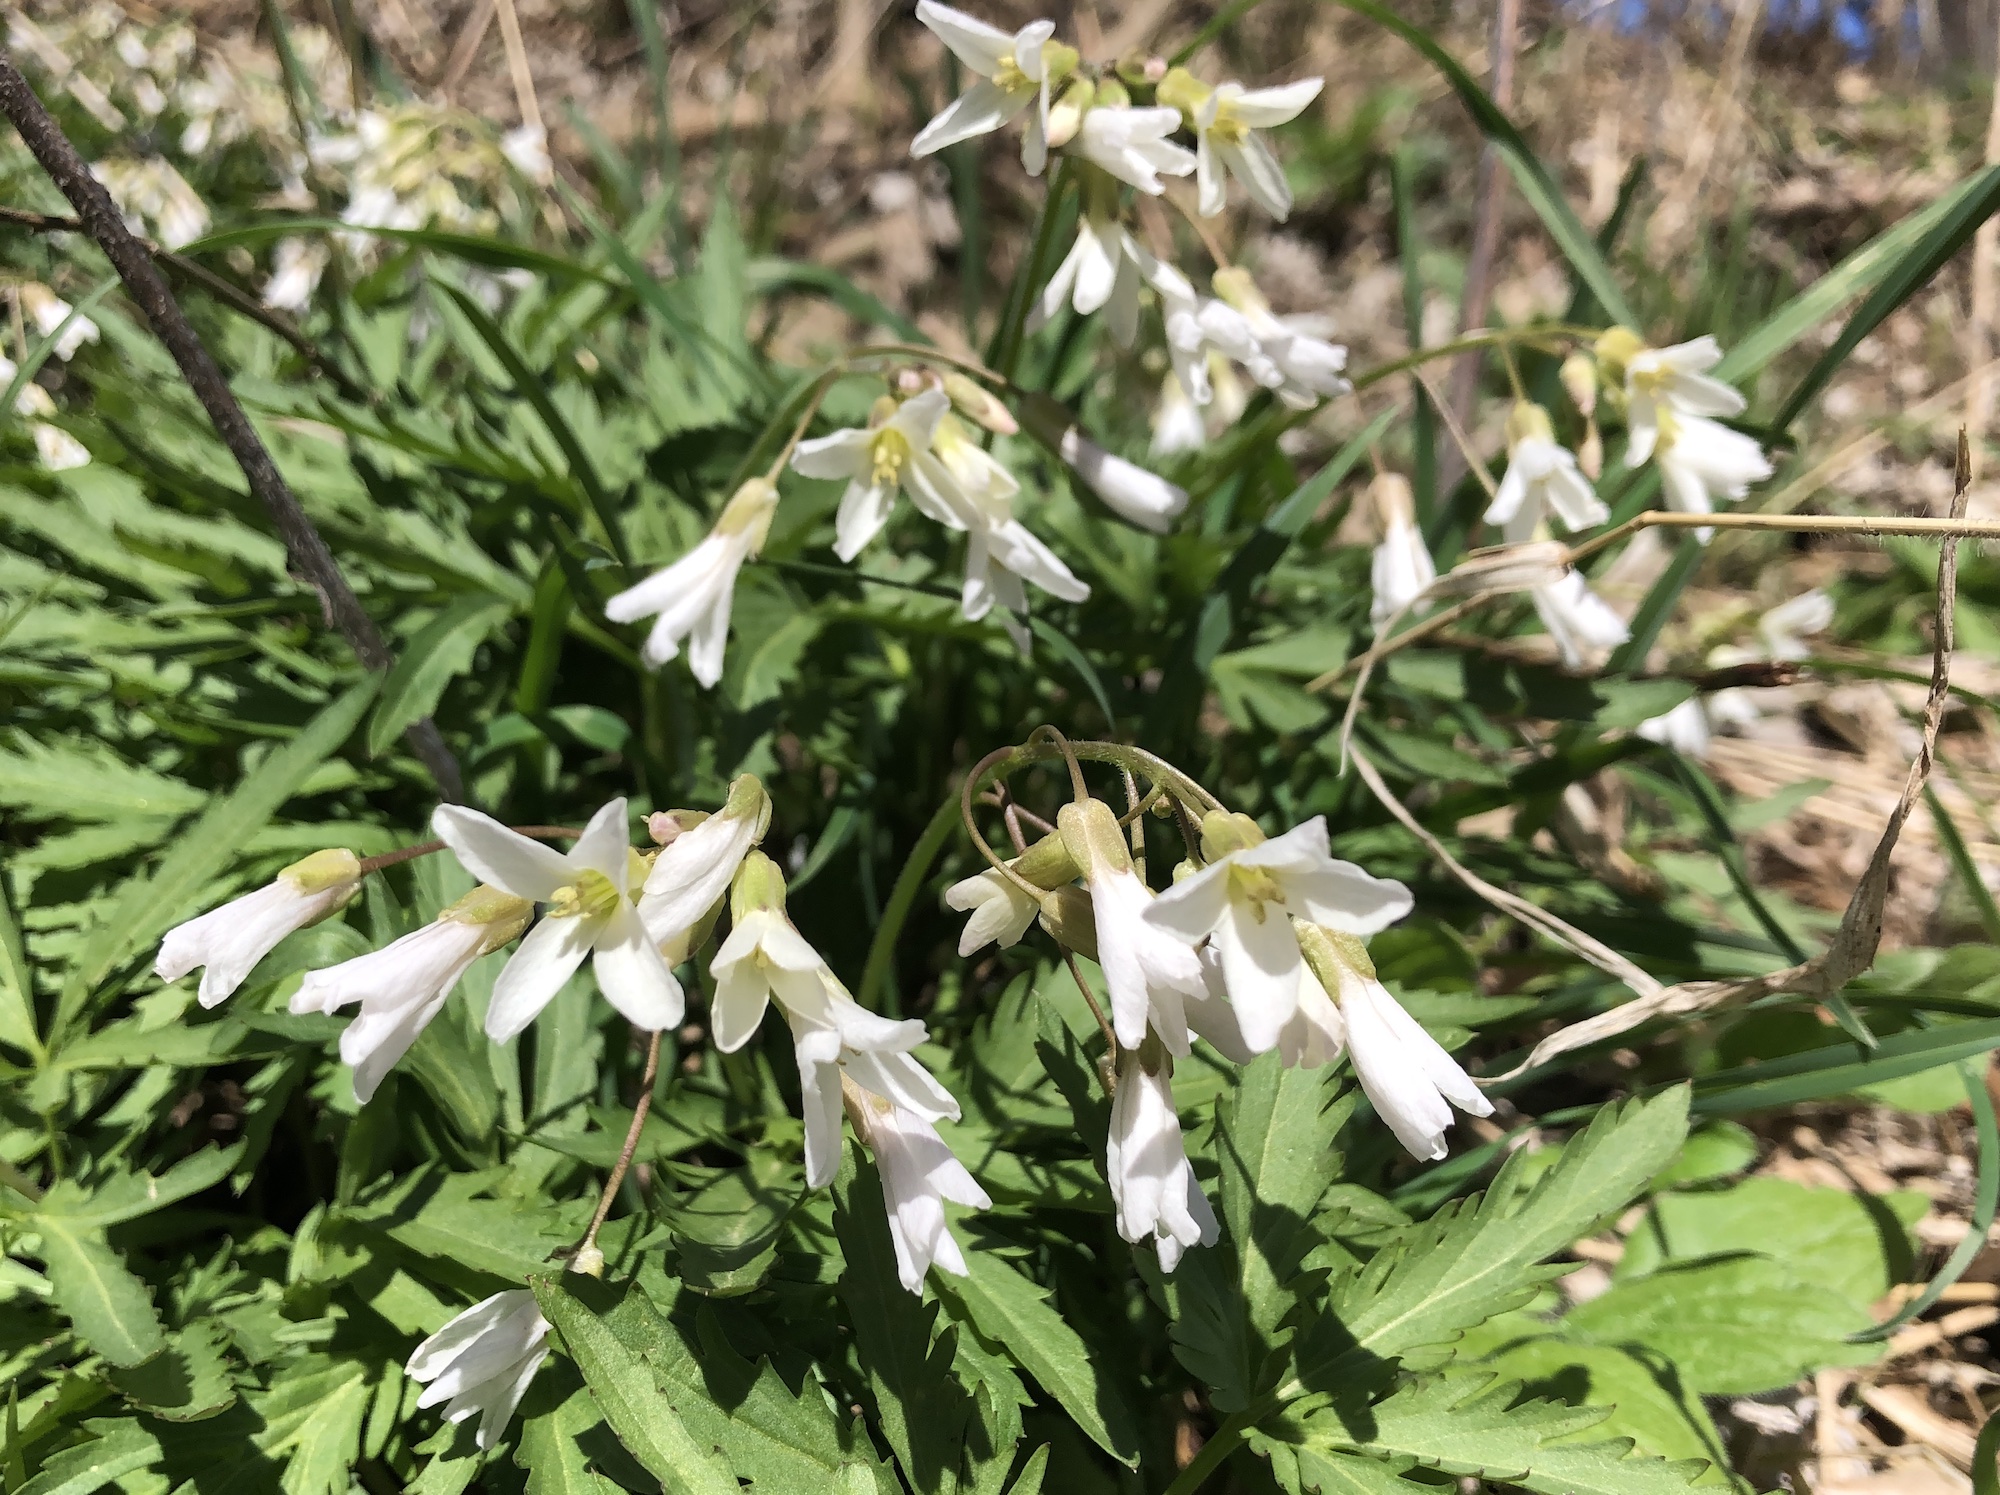 Cutleaf Toothwort near Council Ring Spring on April 19, 2019.